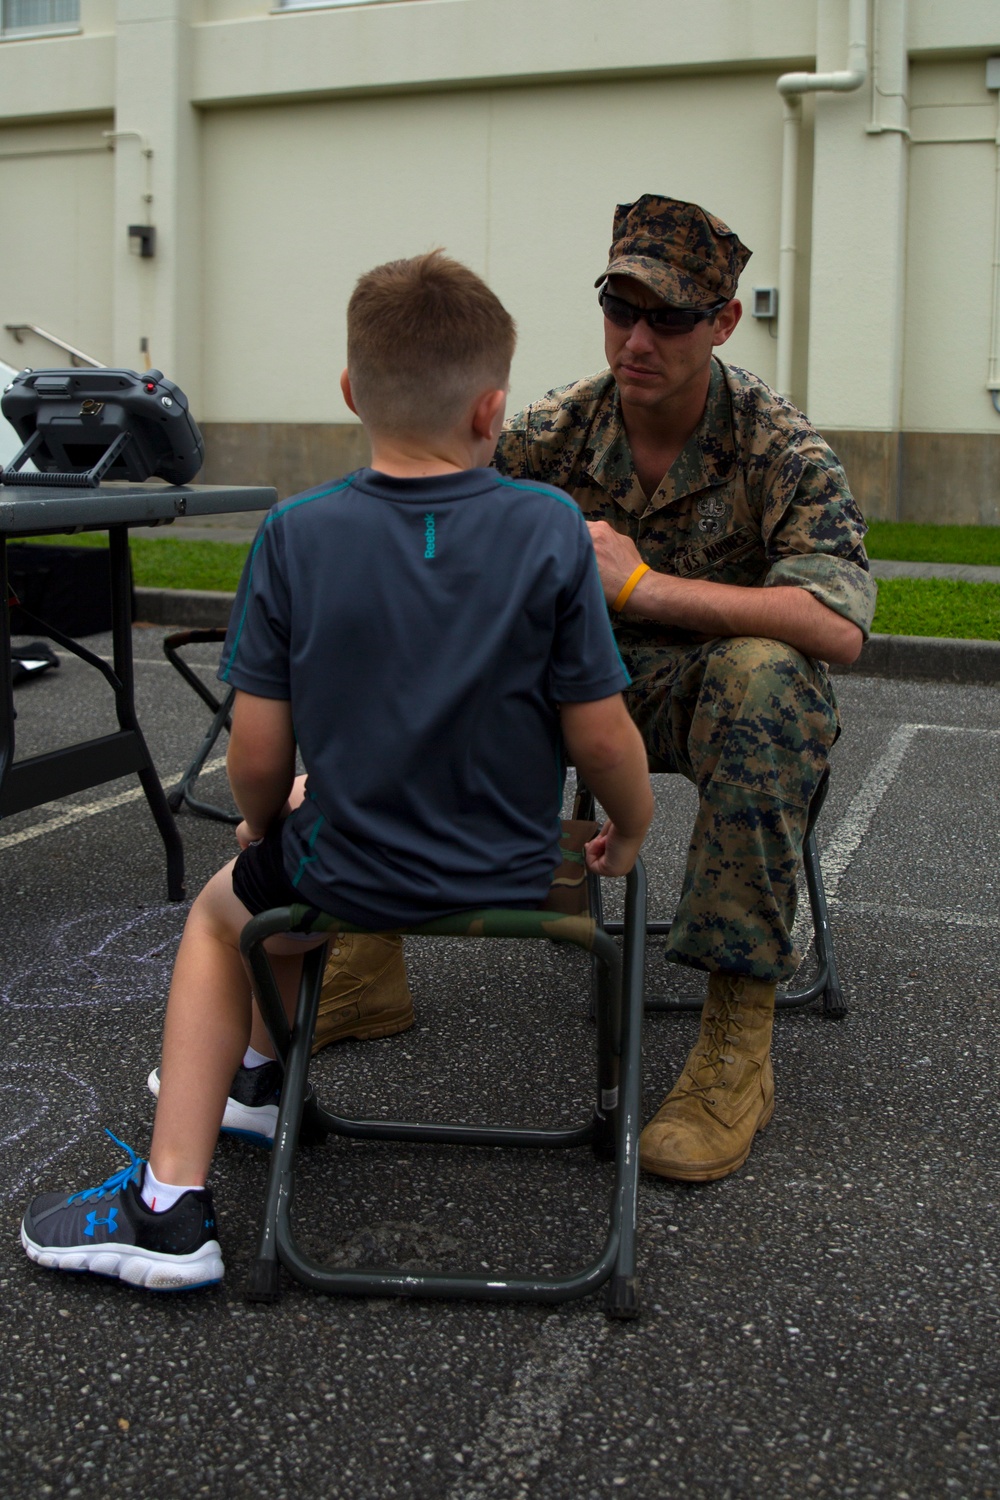 Marines foster growth in student career development during STEM week